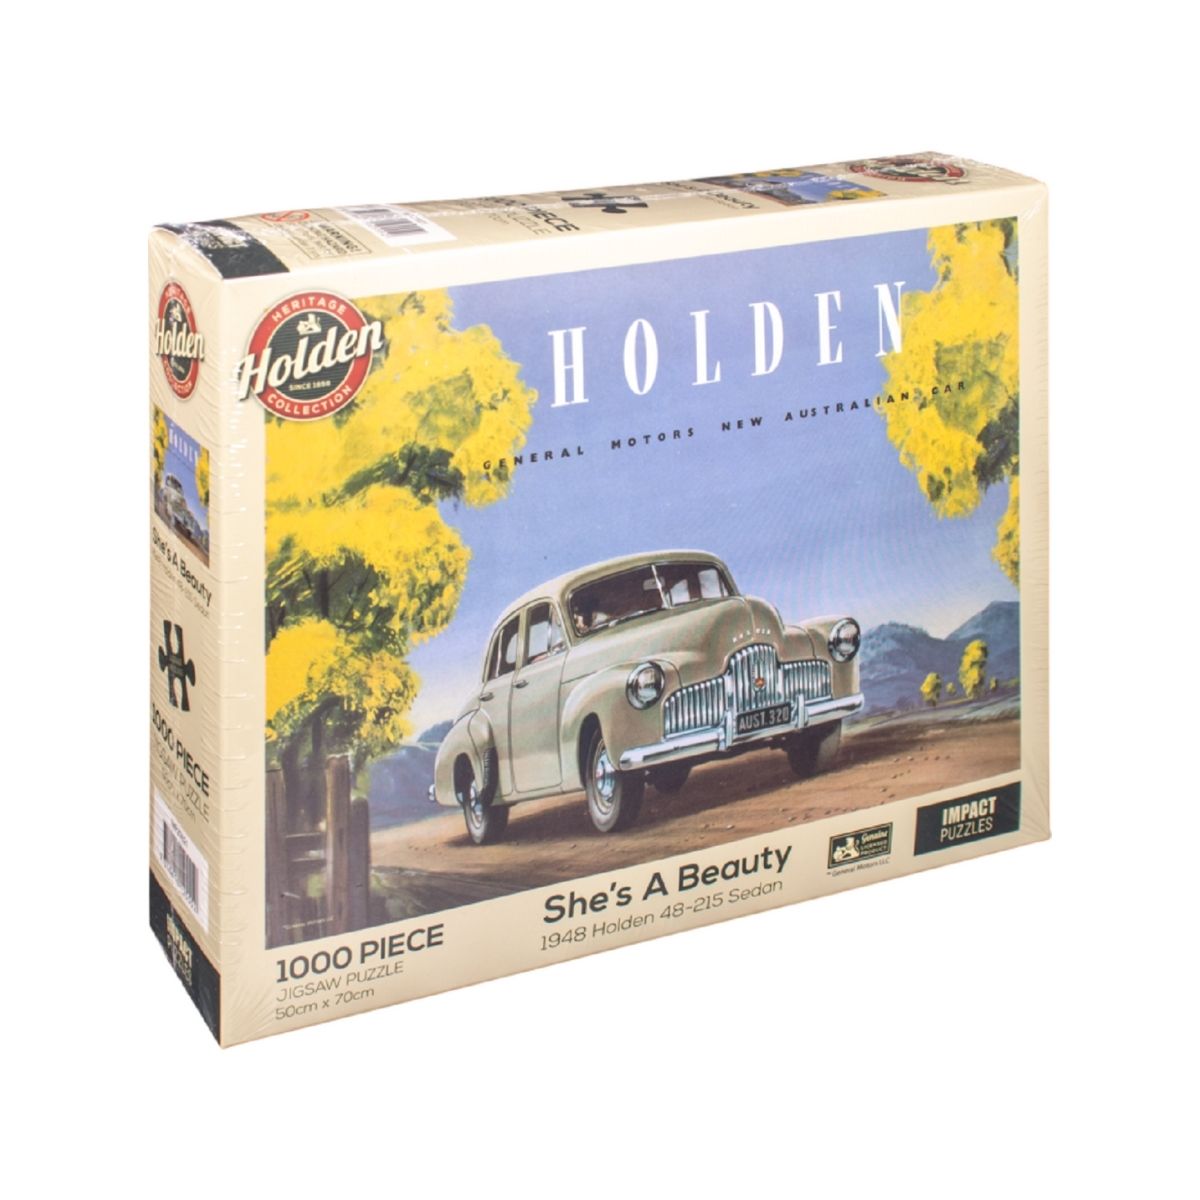 Holden Heritage Collection - Puzzle - She's a Beauty